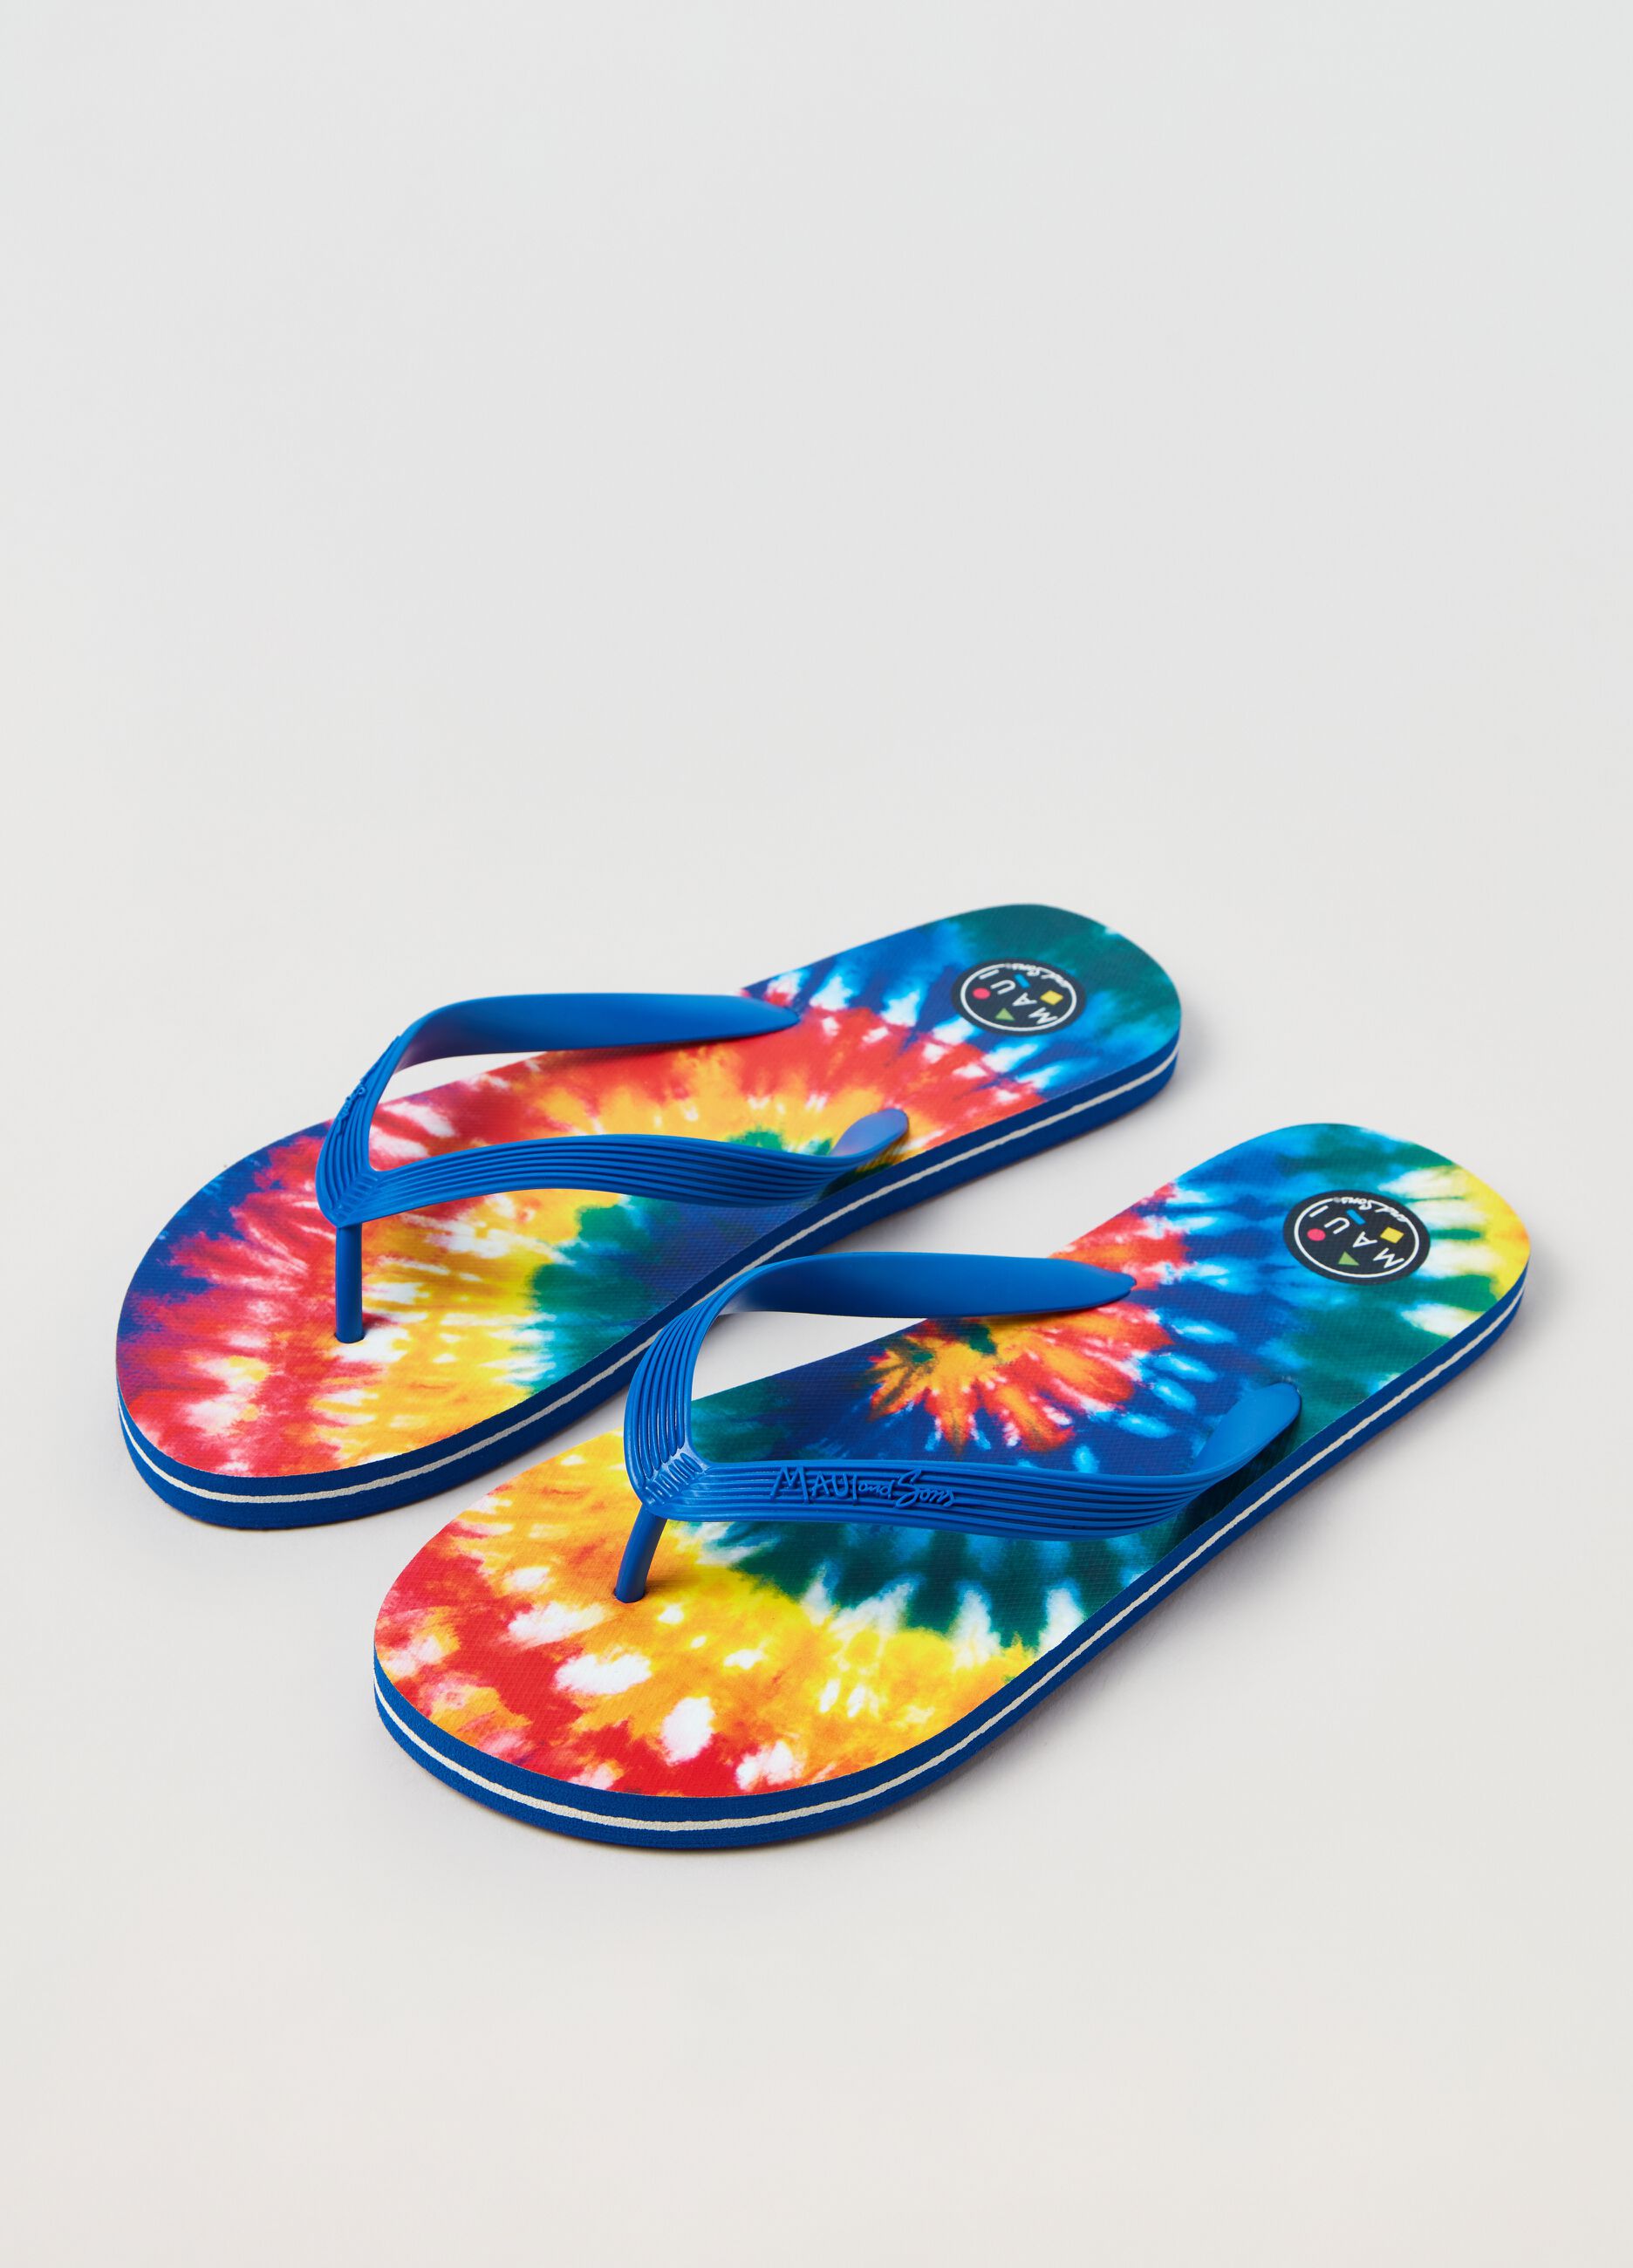 Tie-dye thong sandal by Maui and Sons